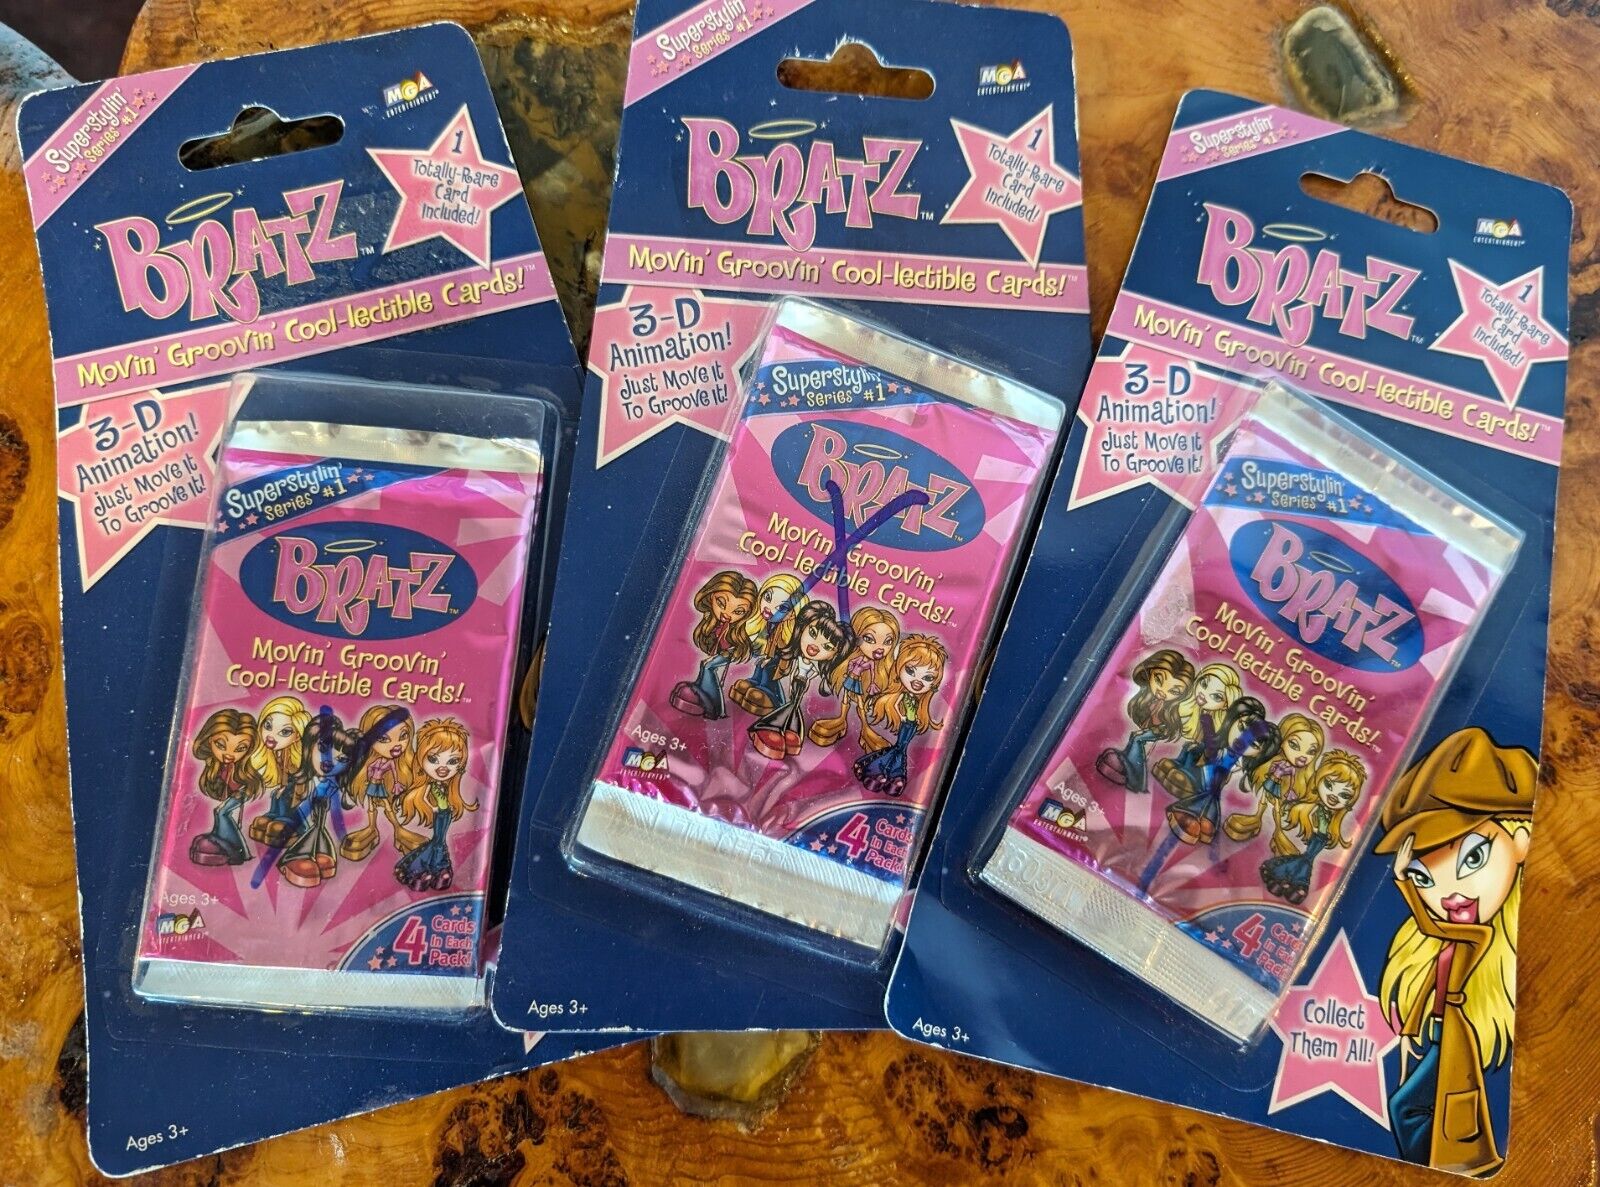 NEW IN PACKAGE 3 2003 Bratz Movin' Groovin Cool-lectible Series#1 Trading Cards